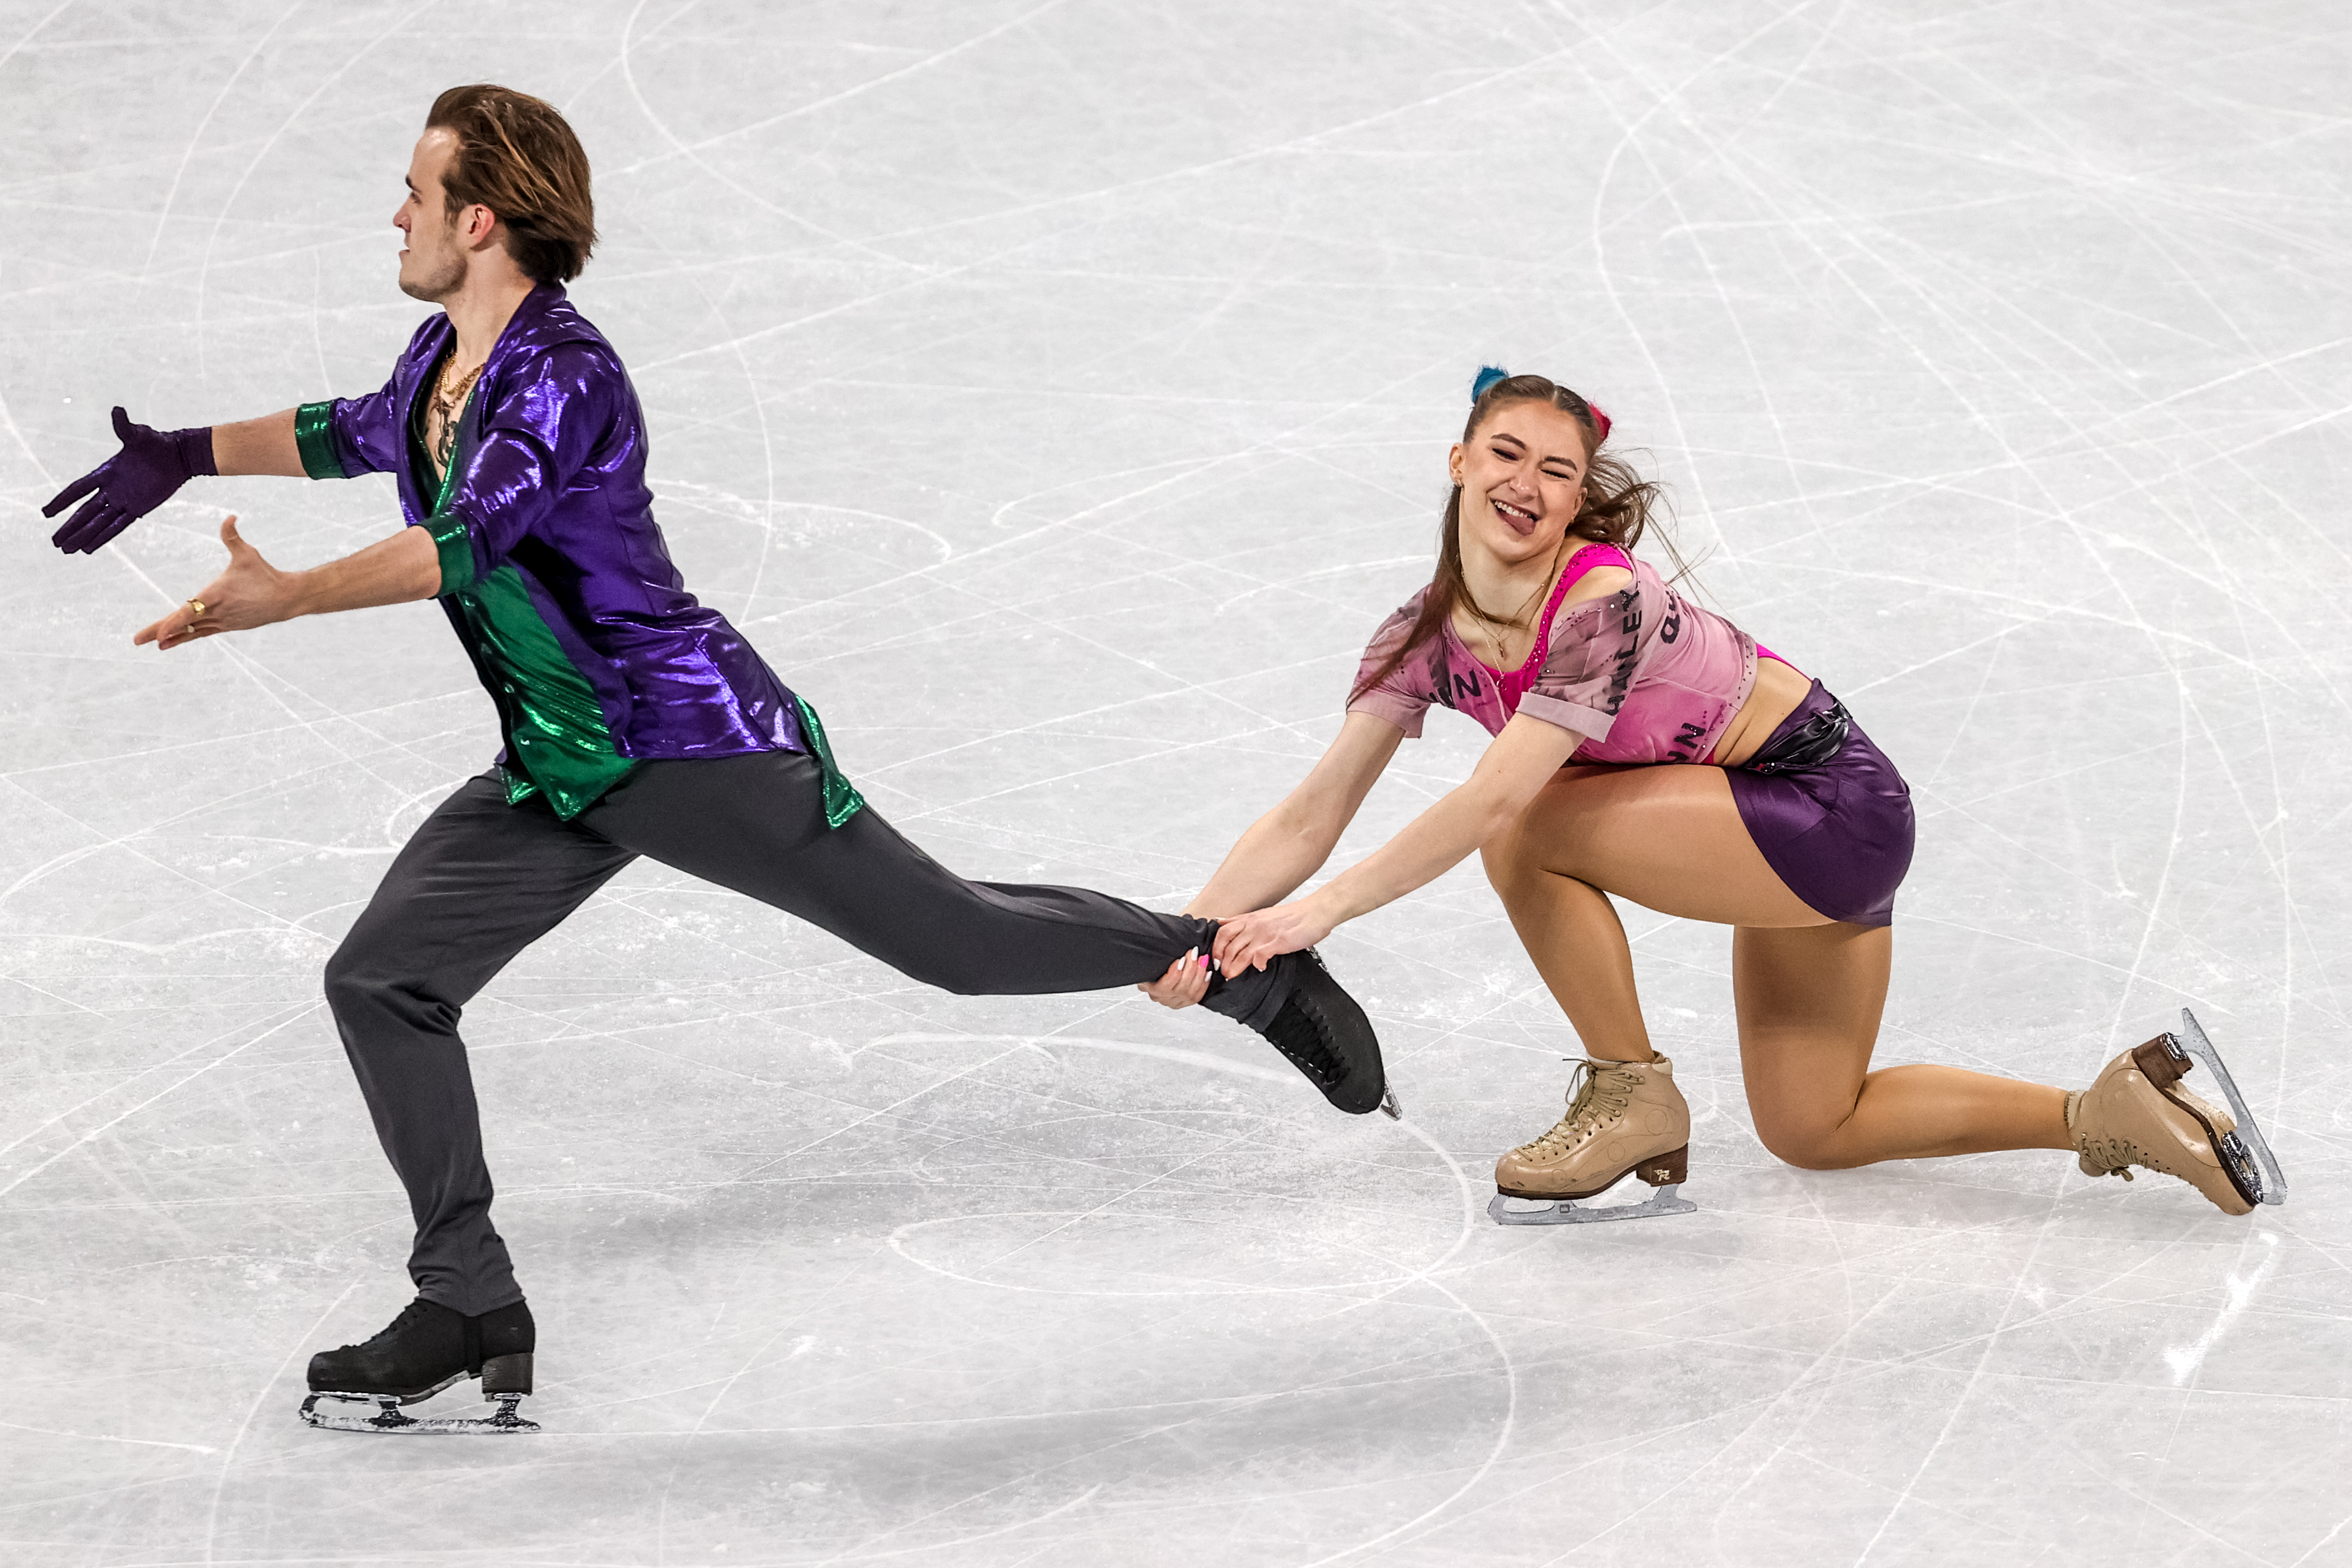 Pairs Figure Skating When to Watch at Olympics 2022